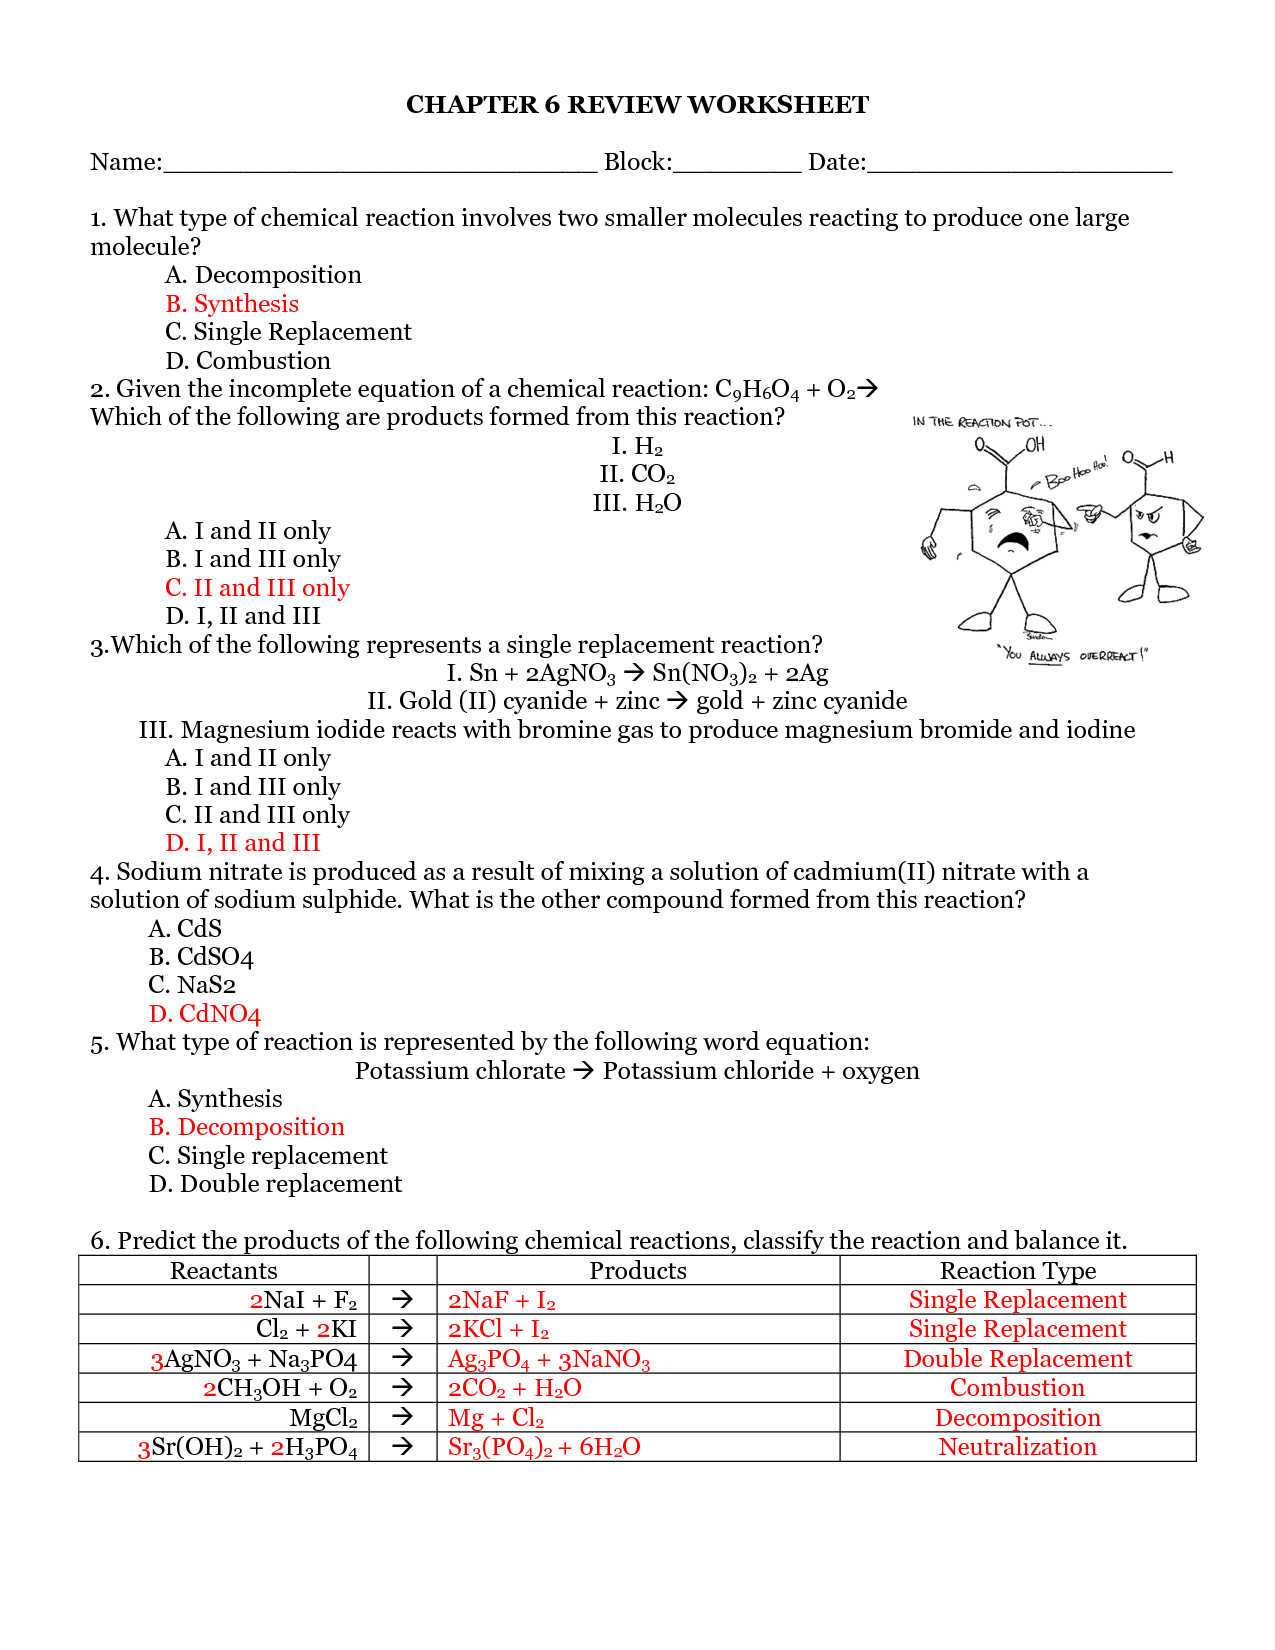 Protein Synthesis Review Worksheet Answer Key